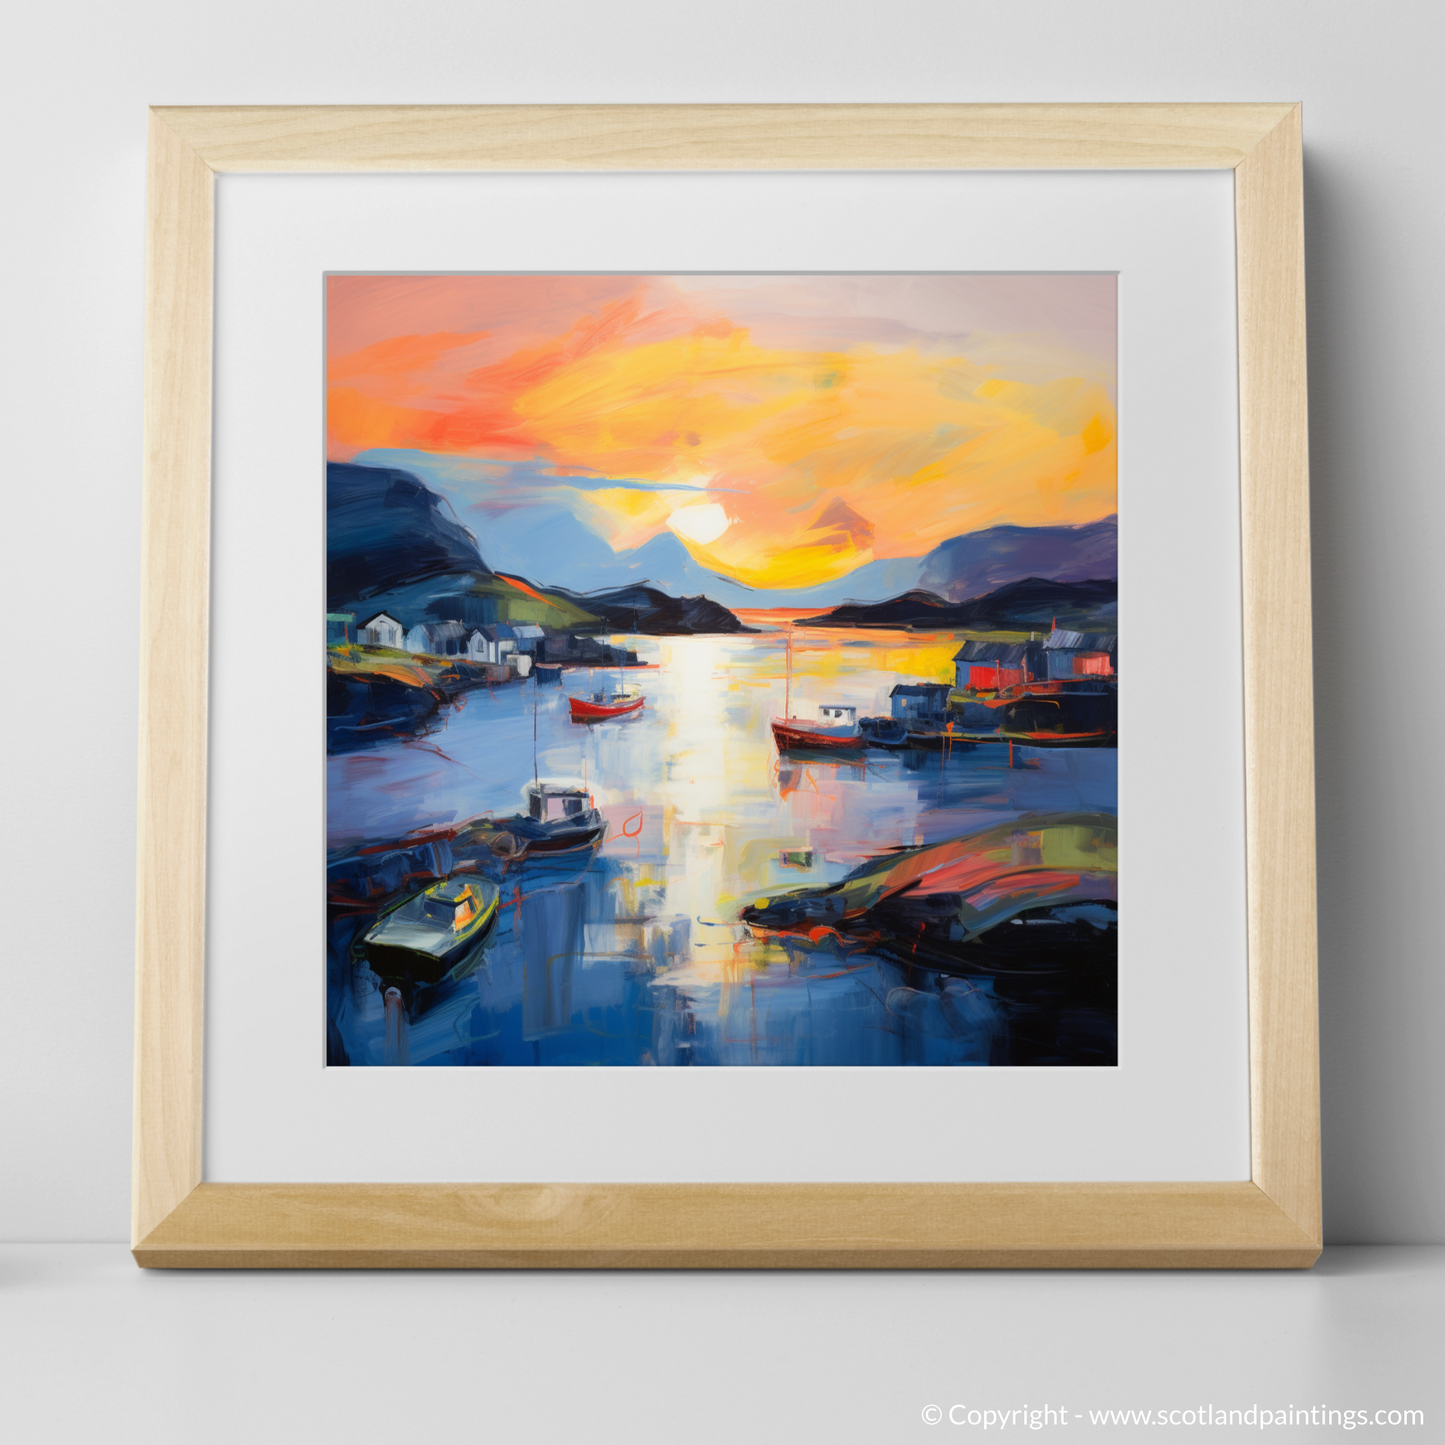 Isleornsay Harbour at Dusk: An Abstract Expressionist Ode to Twilight